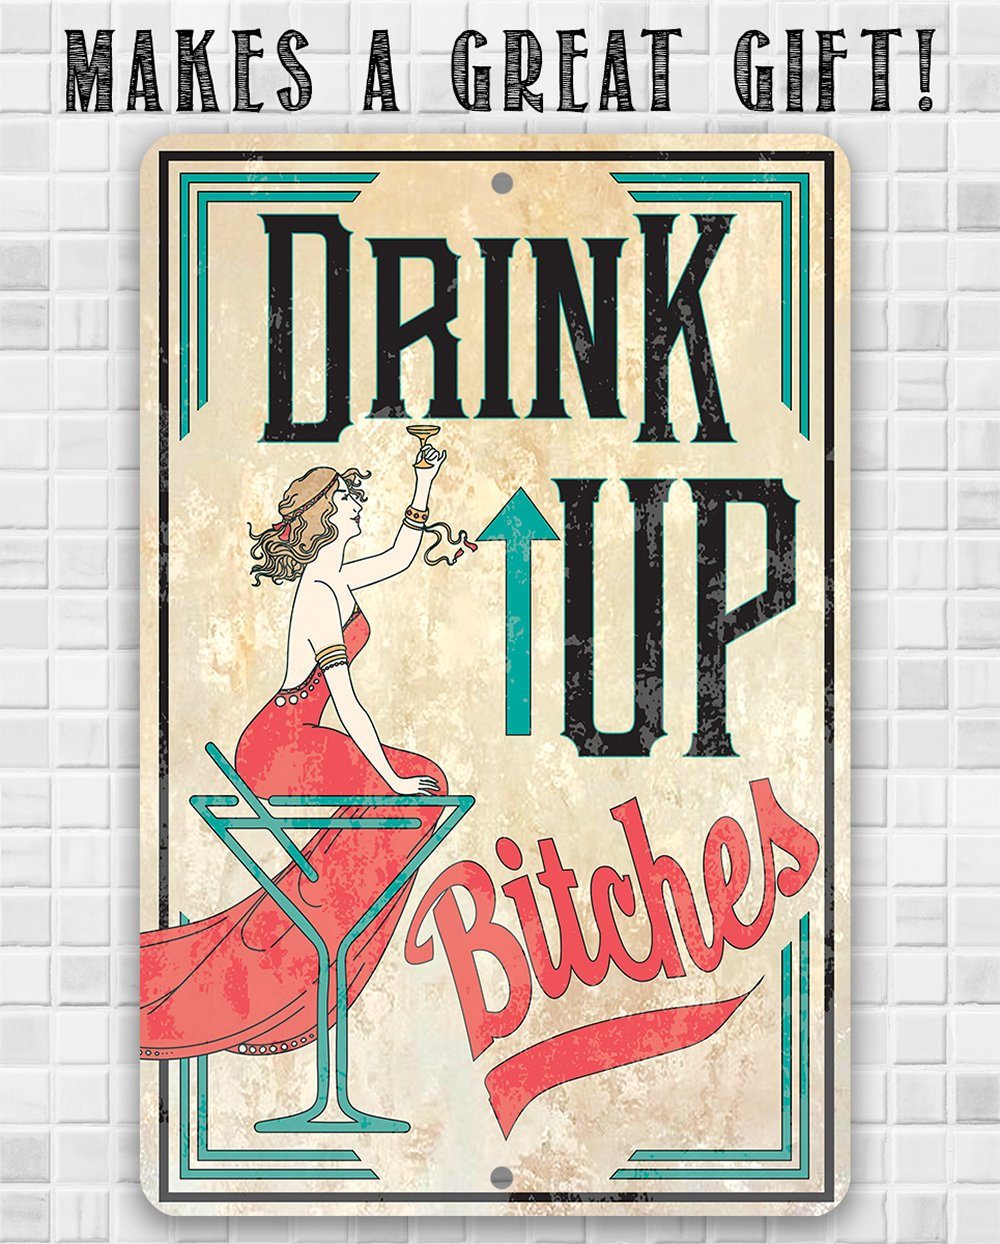 Drink Up Bitches - Metal Sign | Lone Star Art.